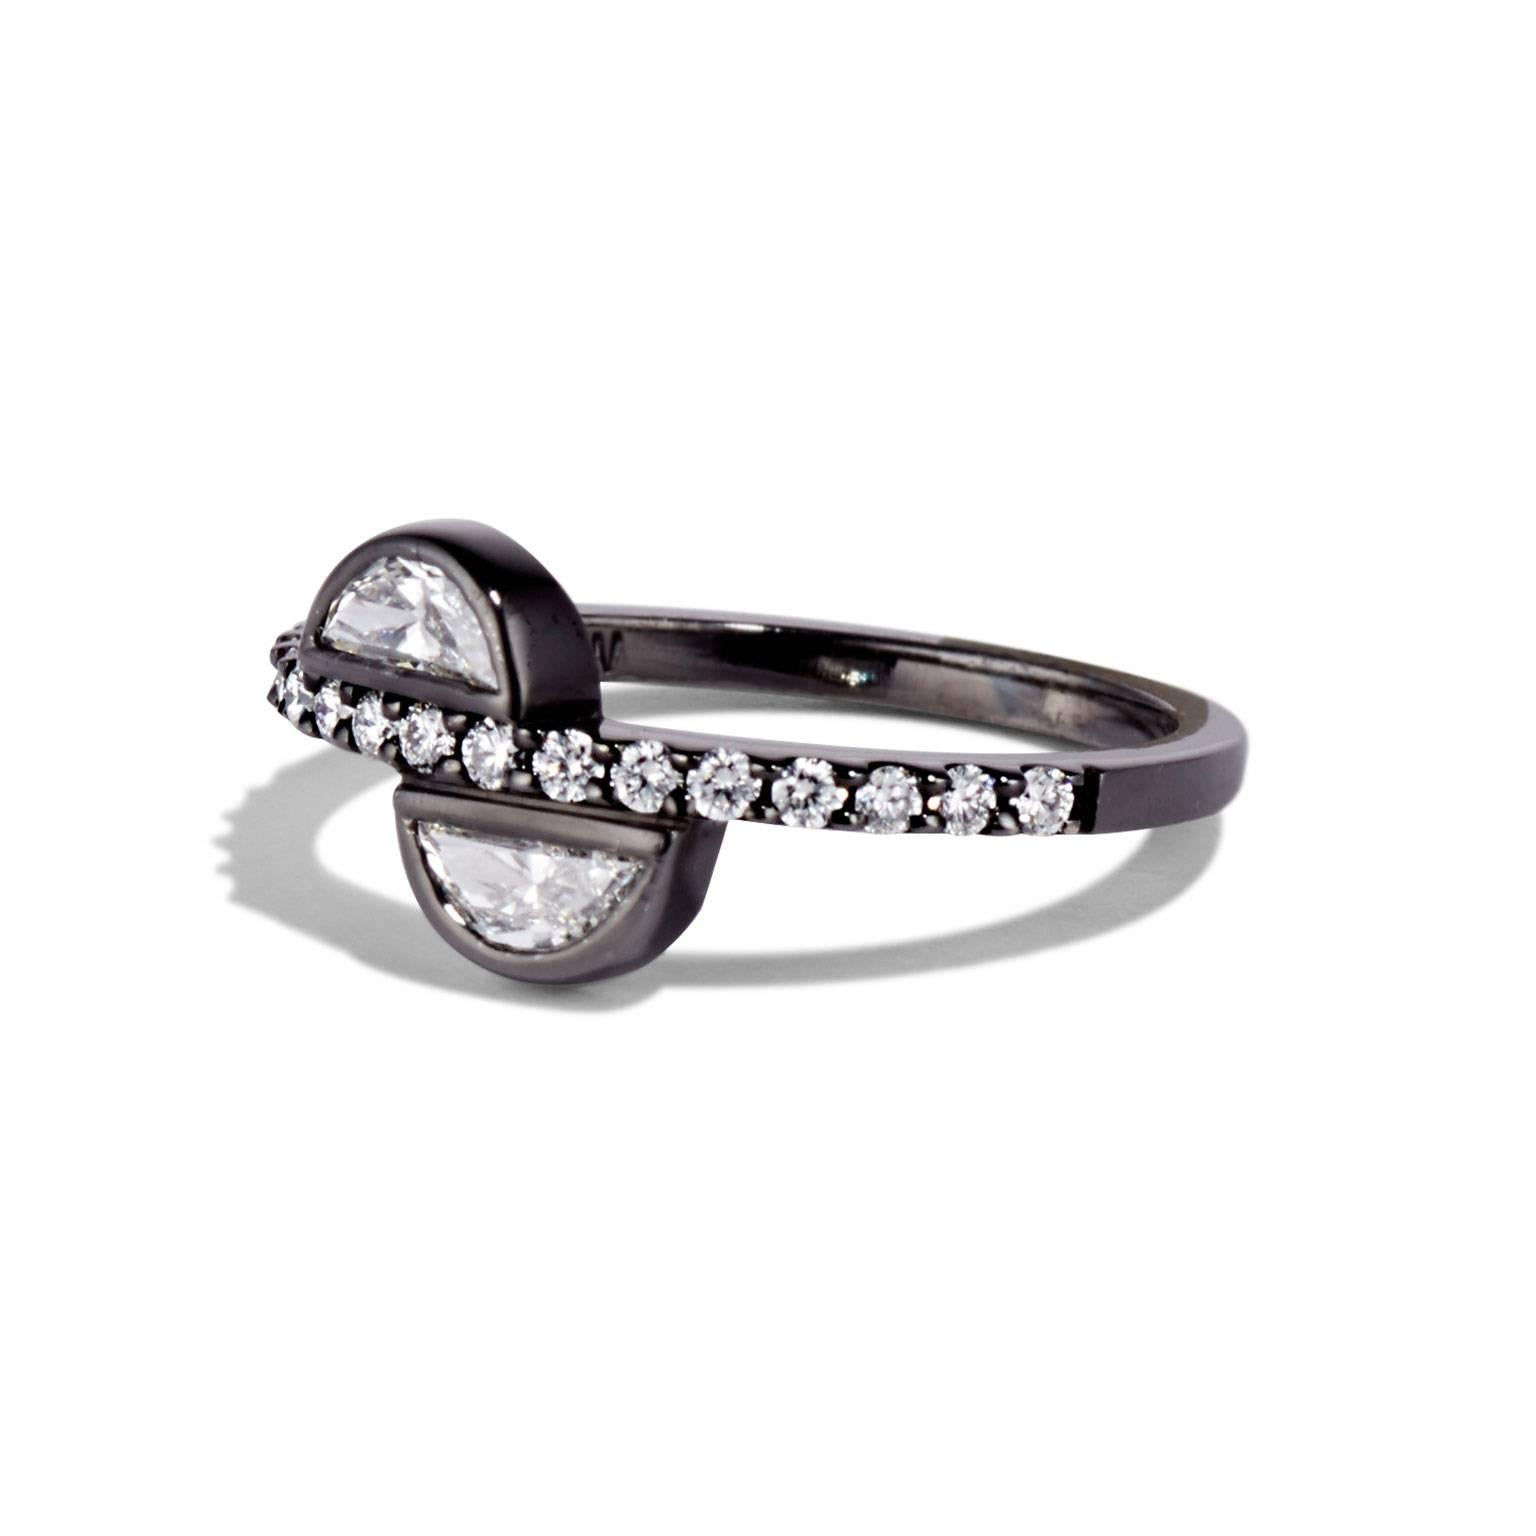 The Half Moon ring uses a pair of diamonds in a sculptural way, carving them into a geometric work of art. The HALF MOON ring from Cushla Whiting's Celestial Collection is made in 18 carat white gold with black plating holding a pair of 0.29 carat